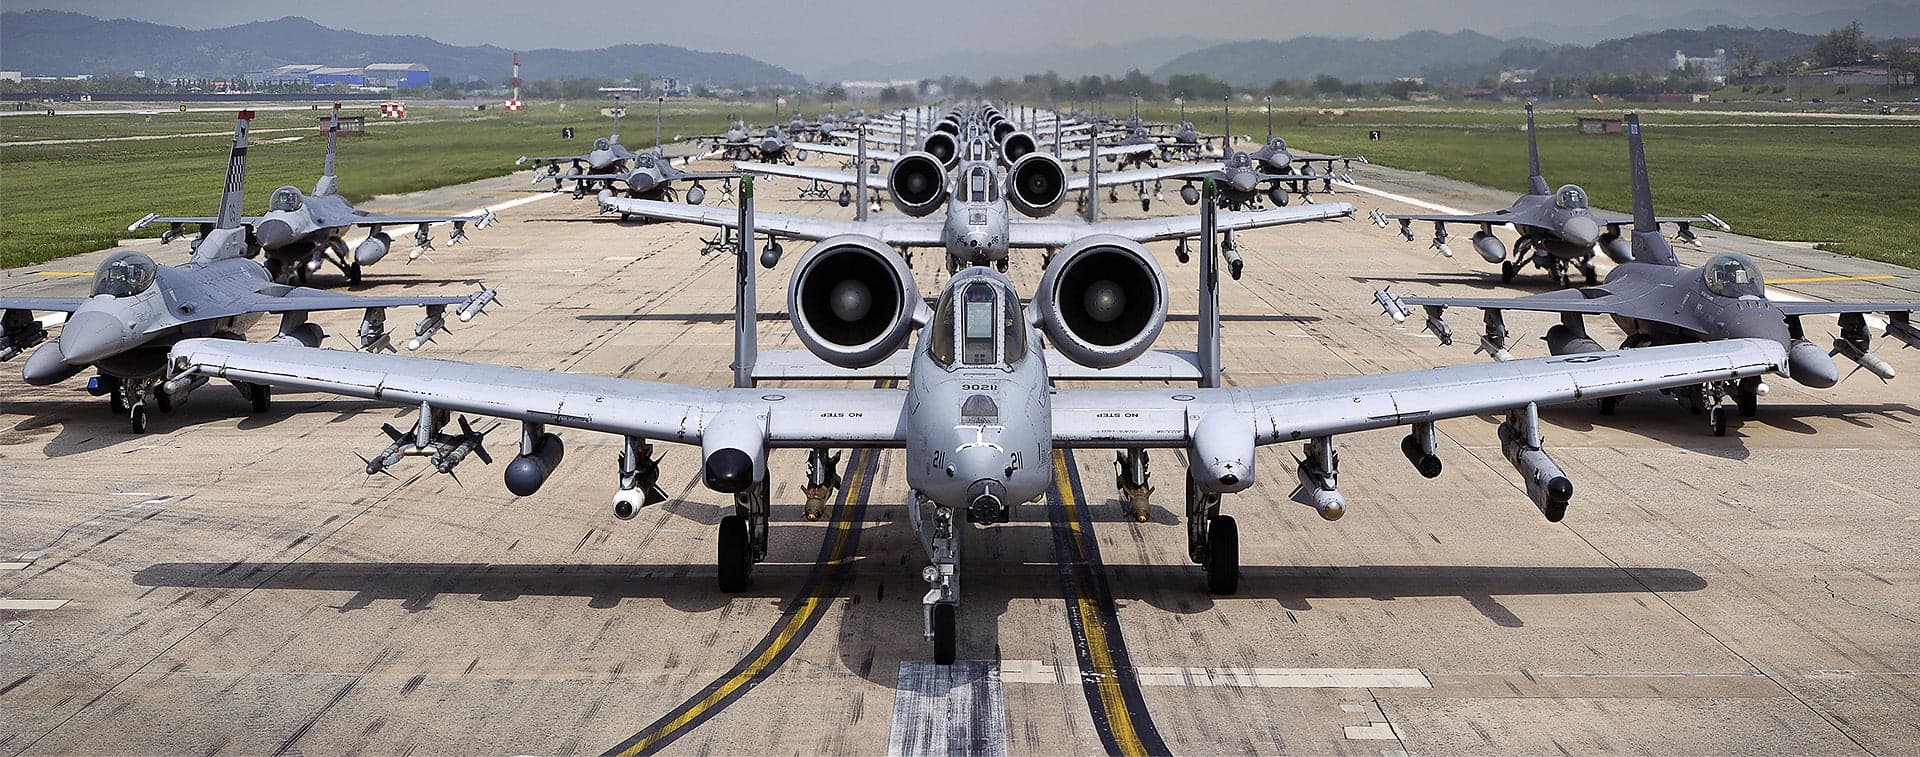 Look at This Sea Of Warthogs and Vipers Doing The “Elephant Walk” at Osan Air Base in South Korea